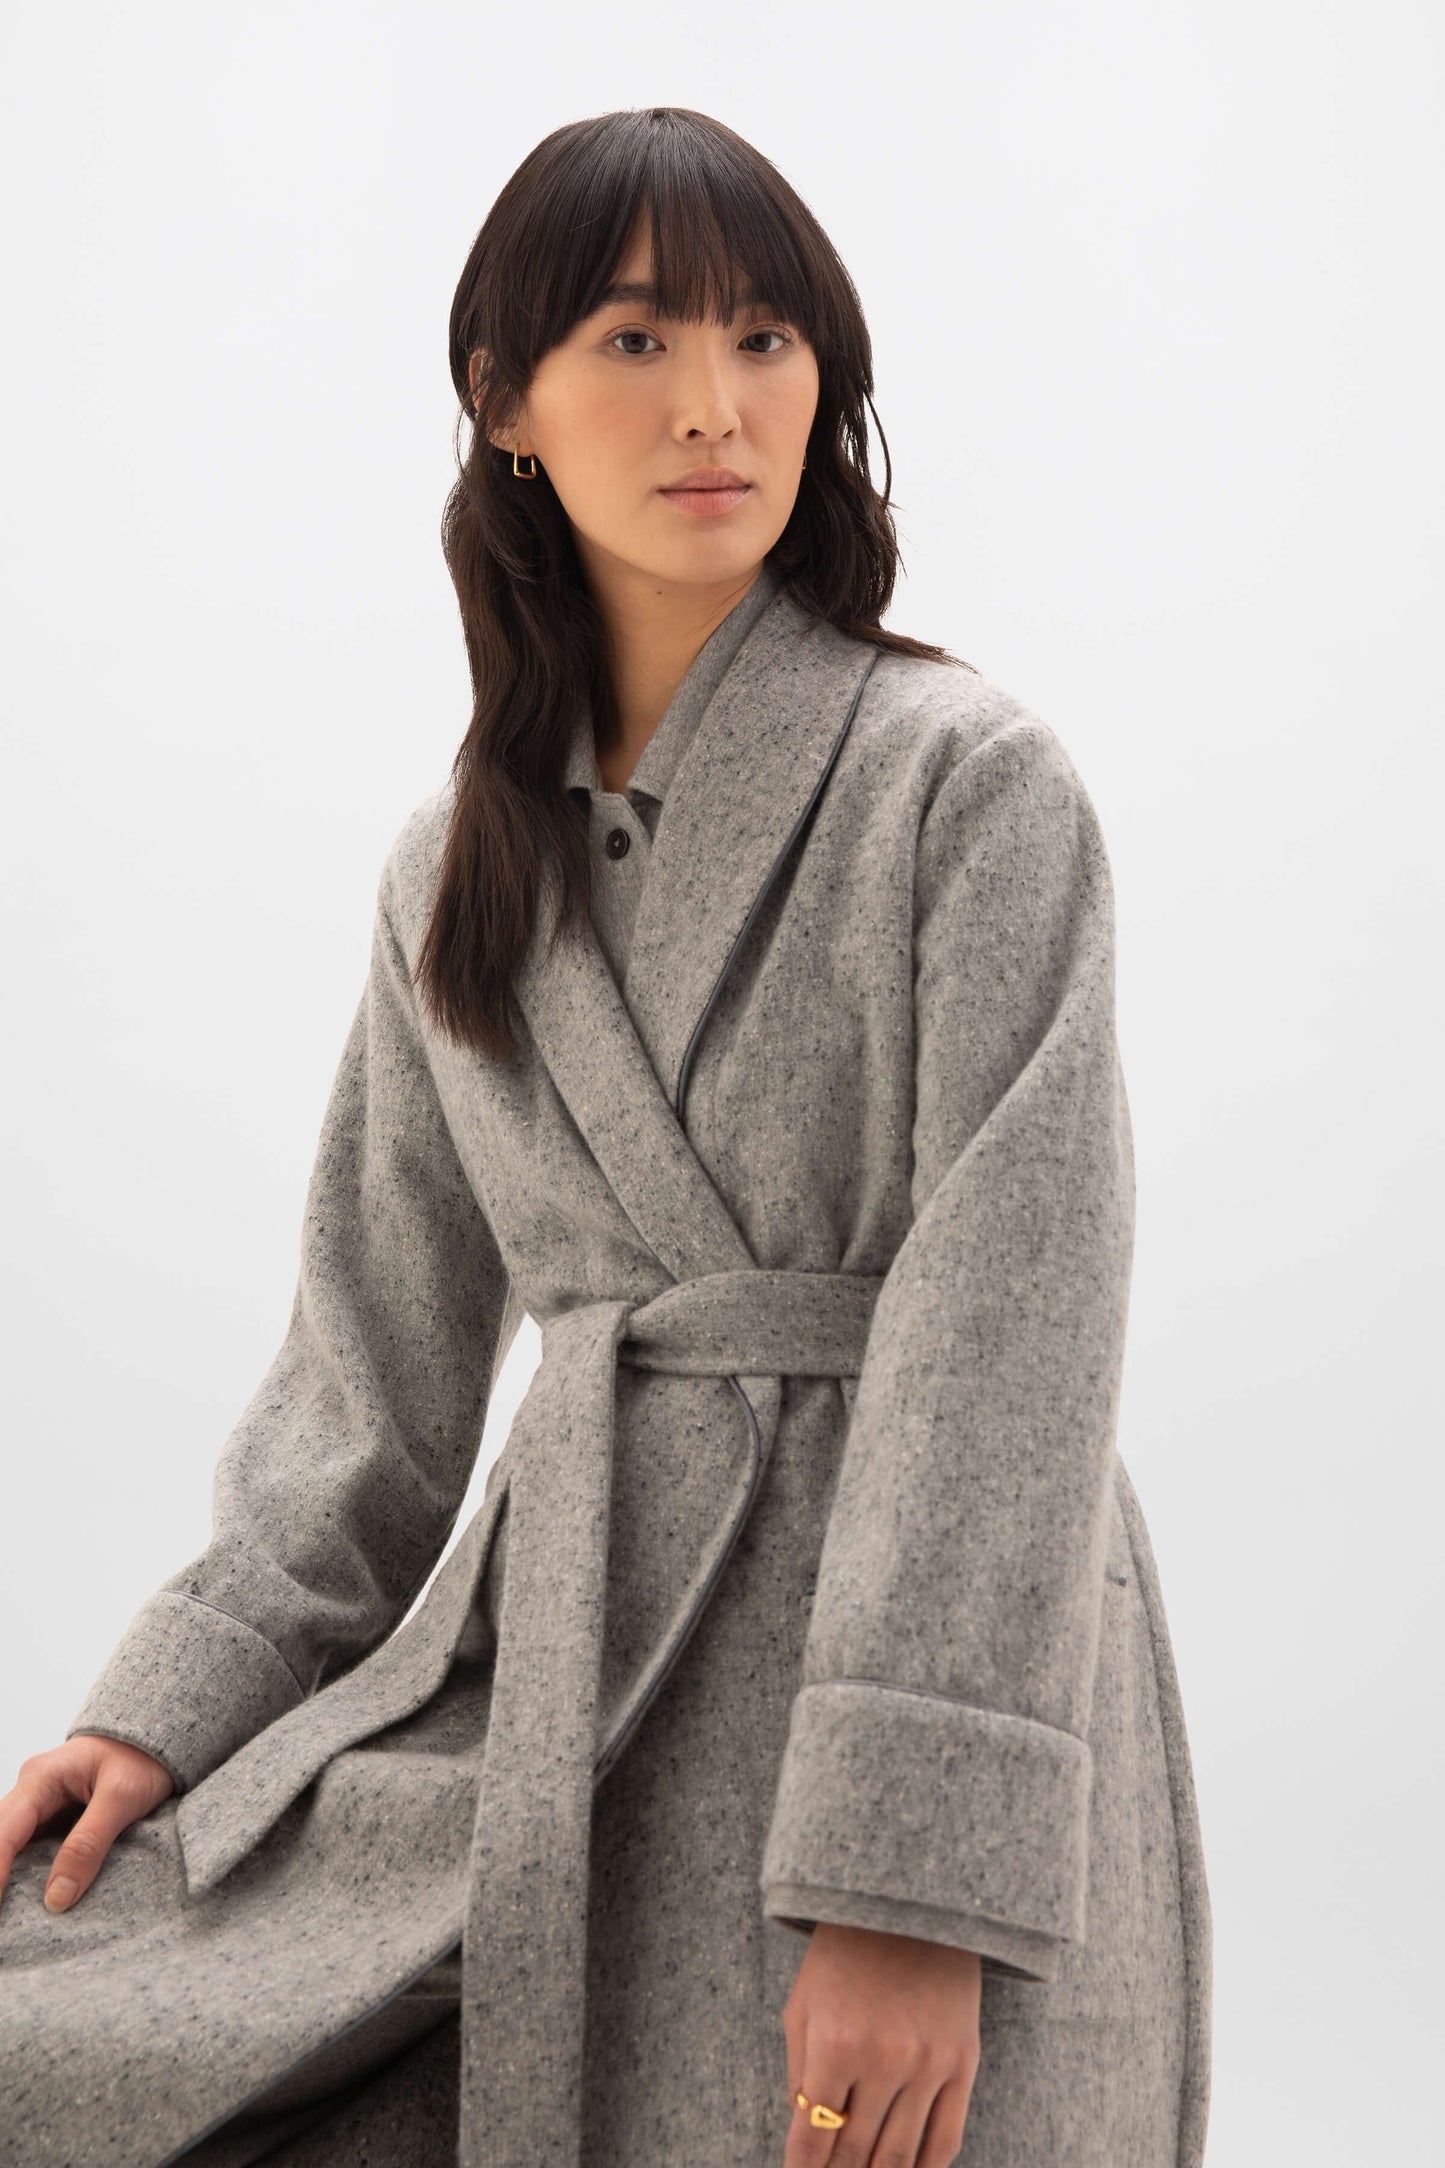 Johnstons of Elgin Women's Donegal Cashmere Dressing Gown in Light Grey TA000529RU740